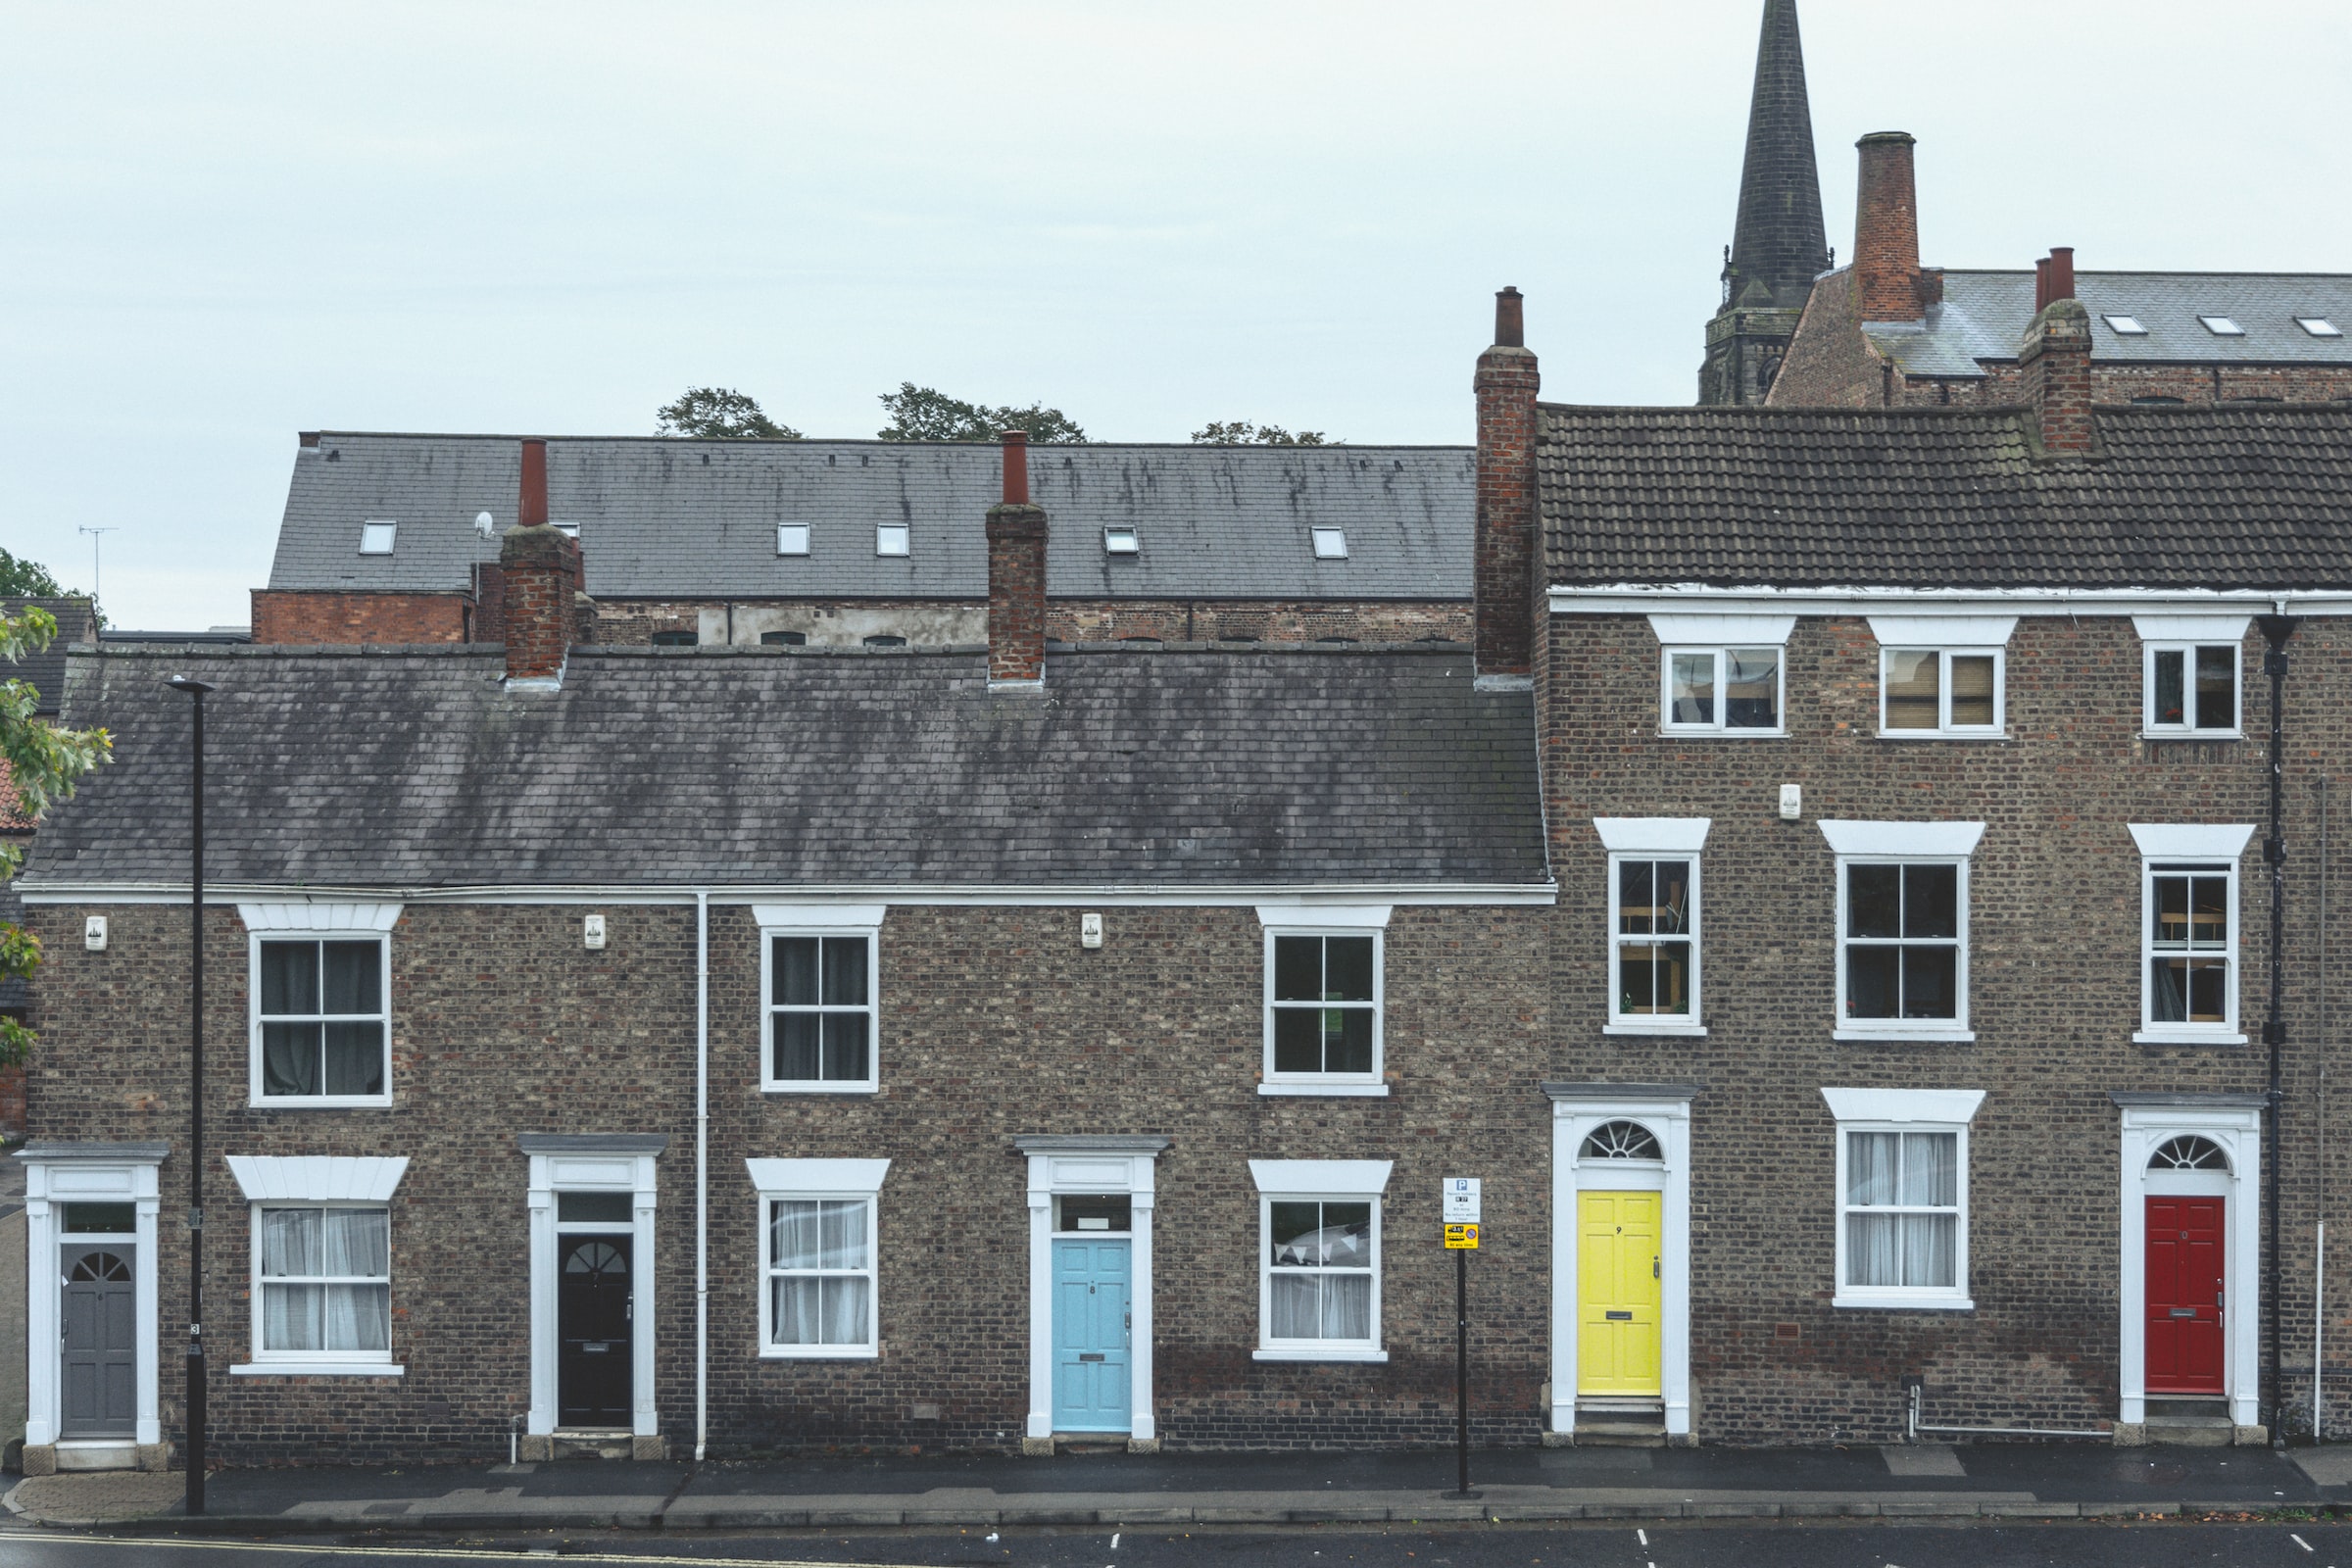 Photo of a row of UK houses with different coloured doors